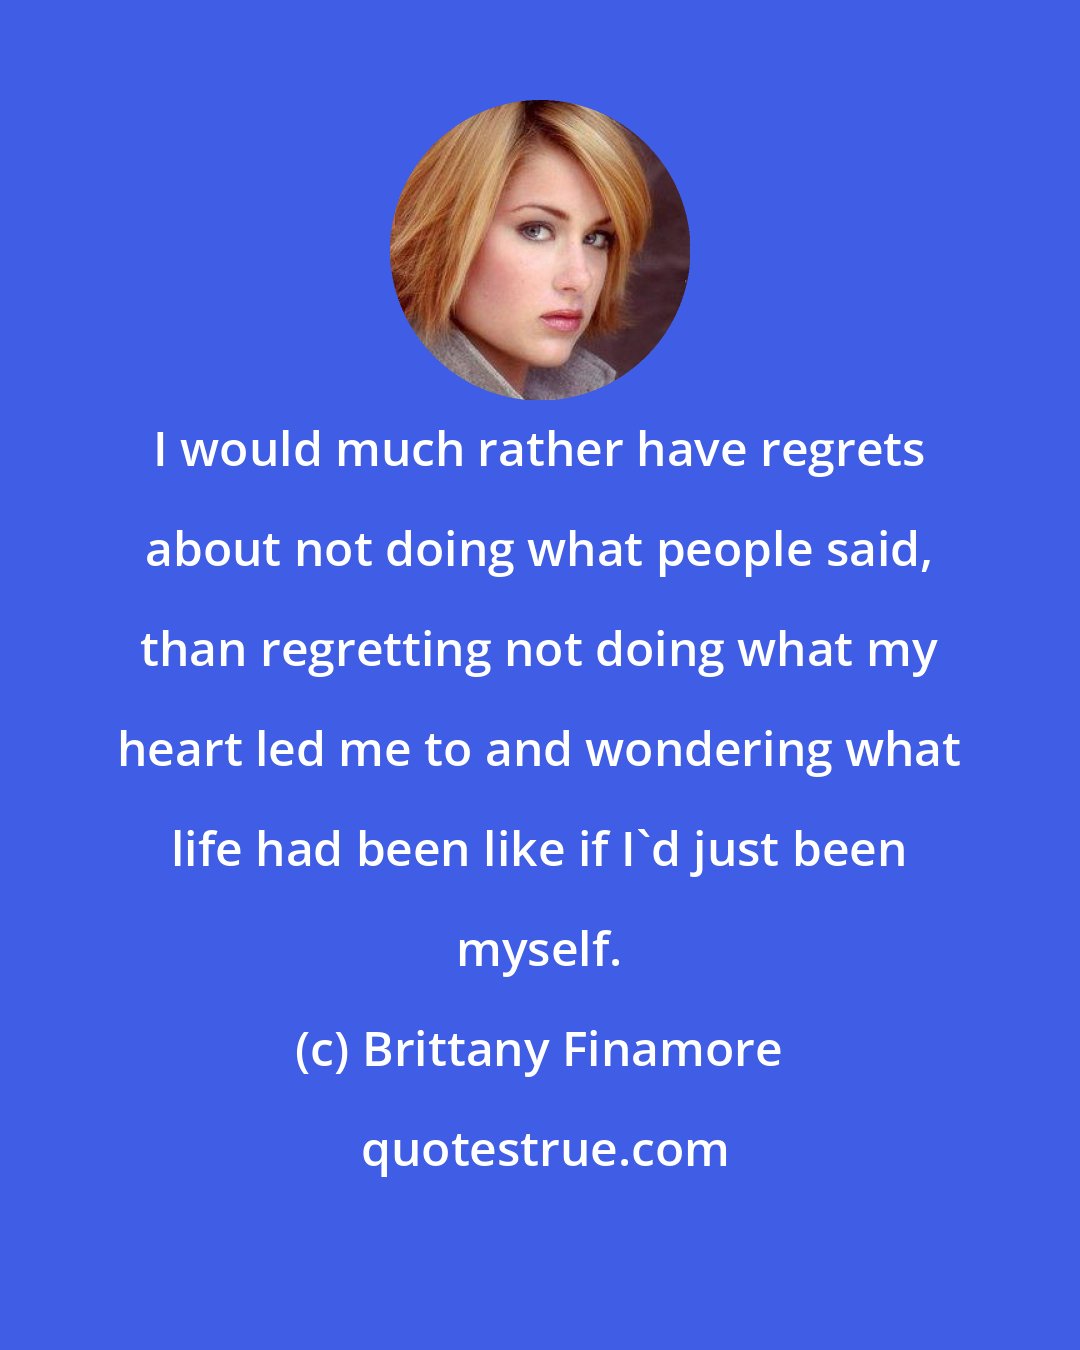 Brittany Finamore: I would much rather have regrets about not doing what people said, than regretting not doing what my heart led me to and wondering what life had been like if I'd just been myself.